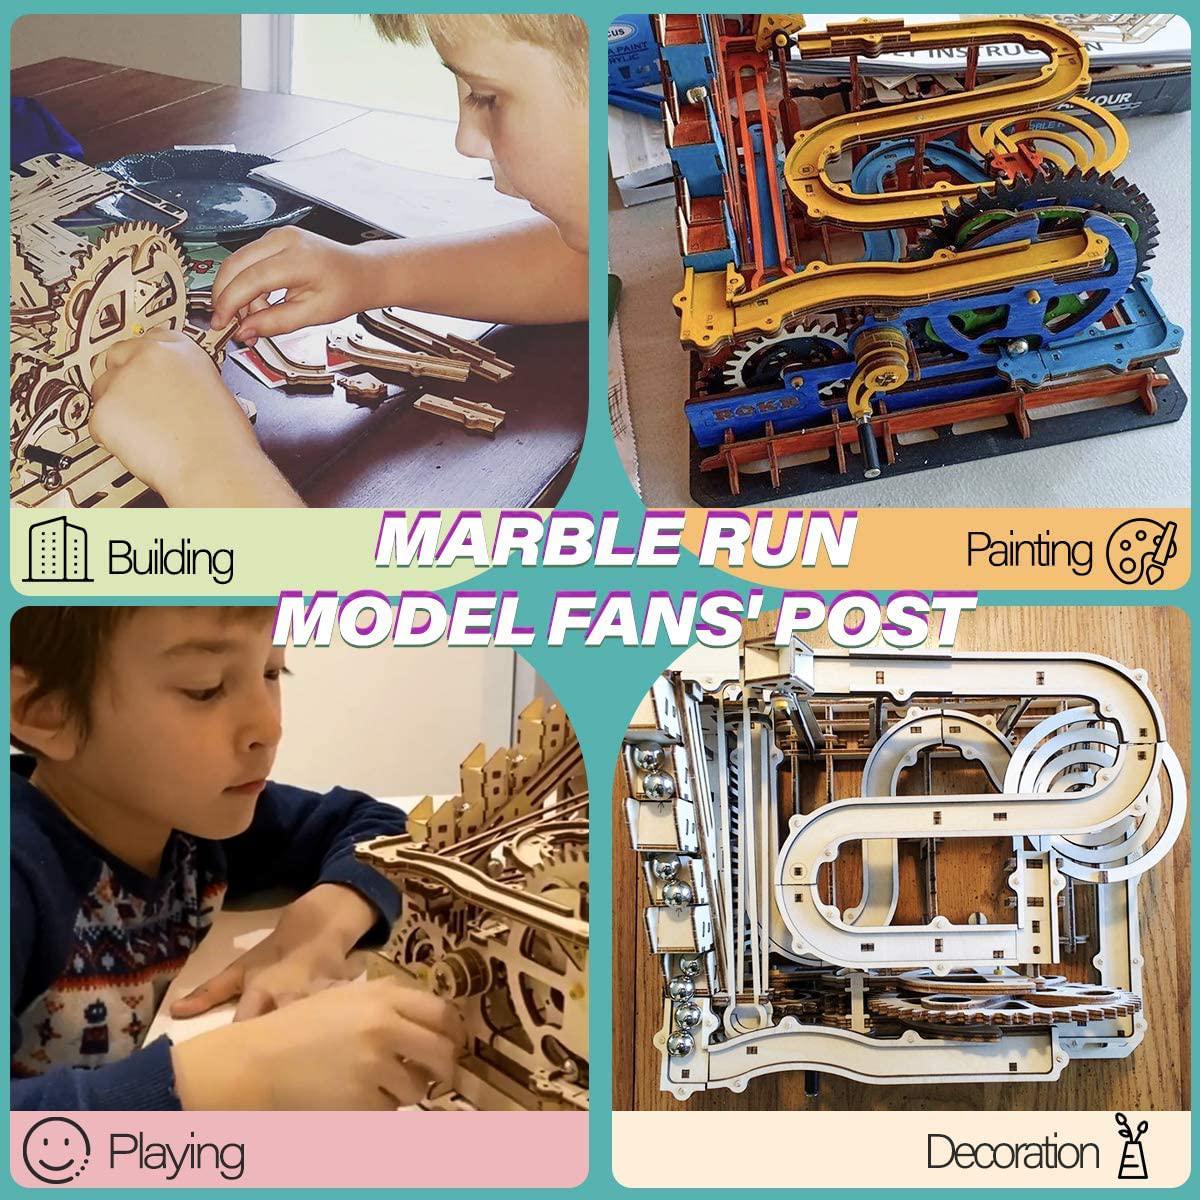 rokr 3d puzzles for adults,wooden marble run,3d wooden puzzles for adults kids ages 12-14,wood puzzles adult,model kits for a